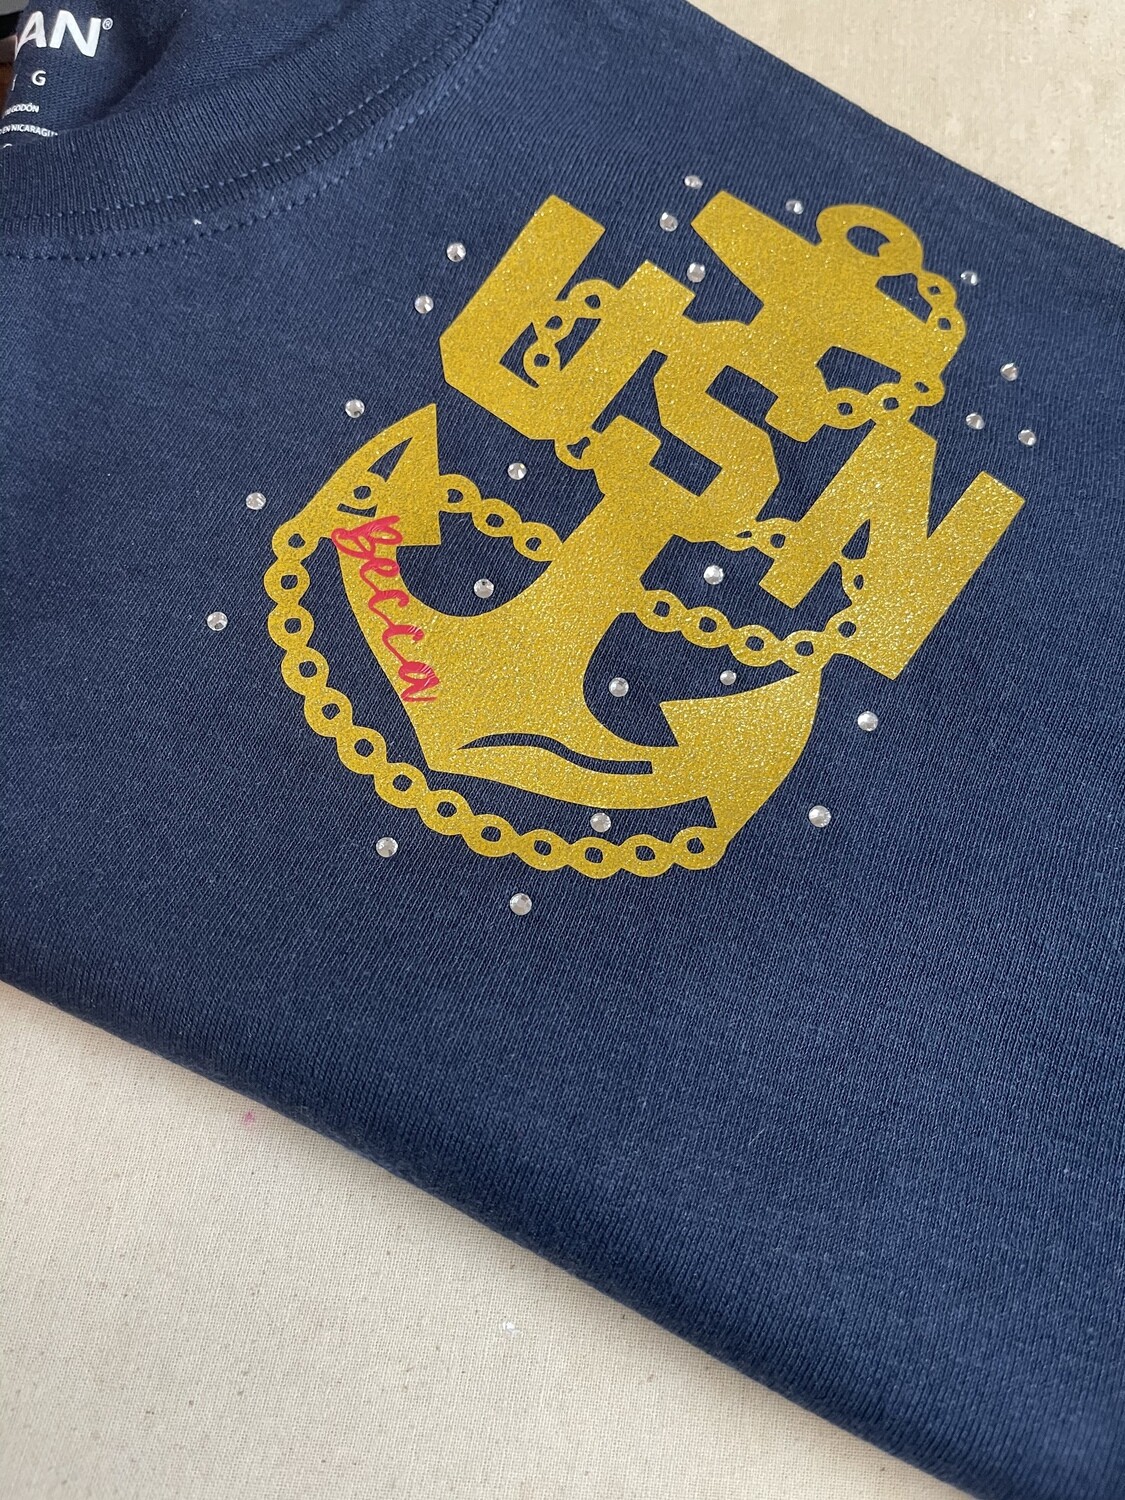 Navy CPO decorated shirt with name